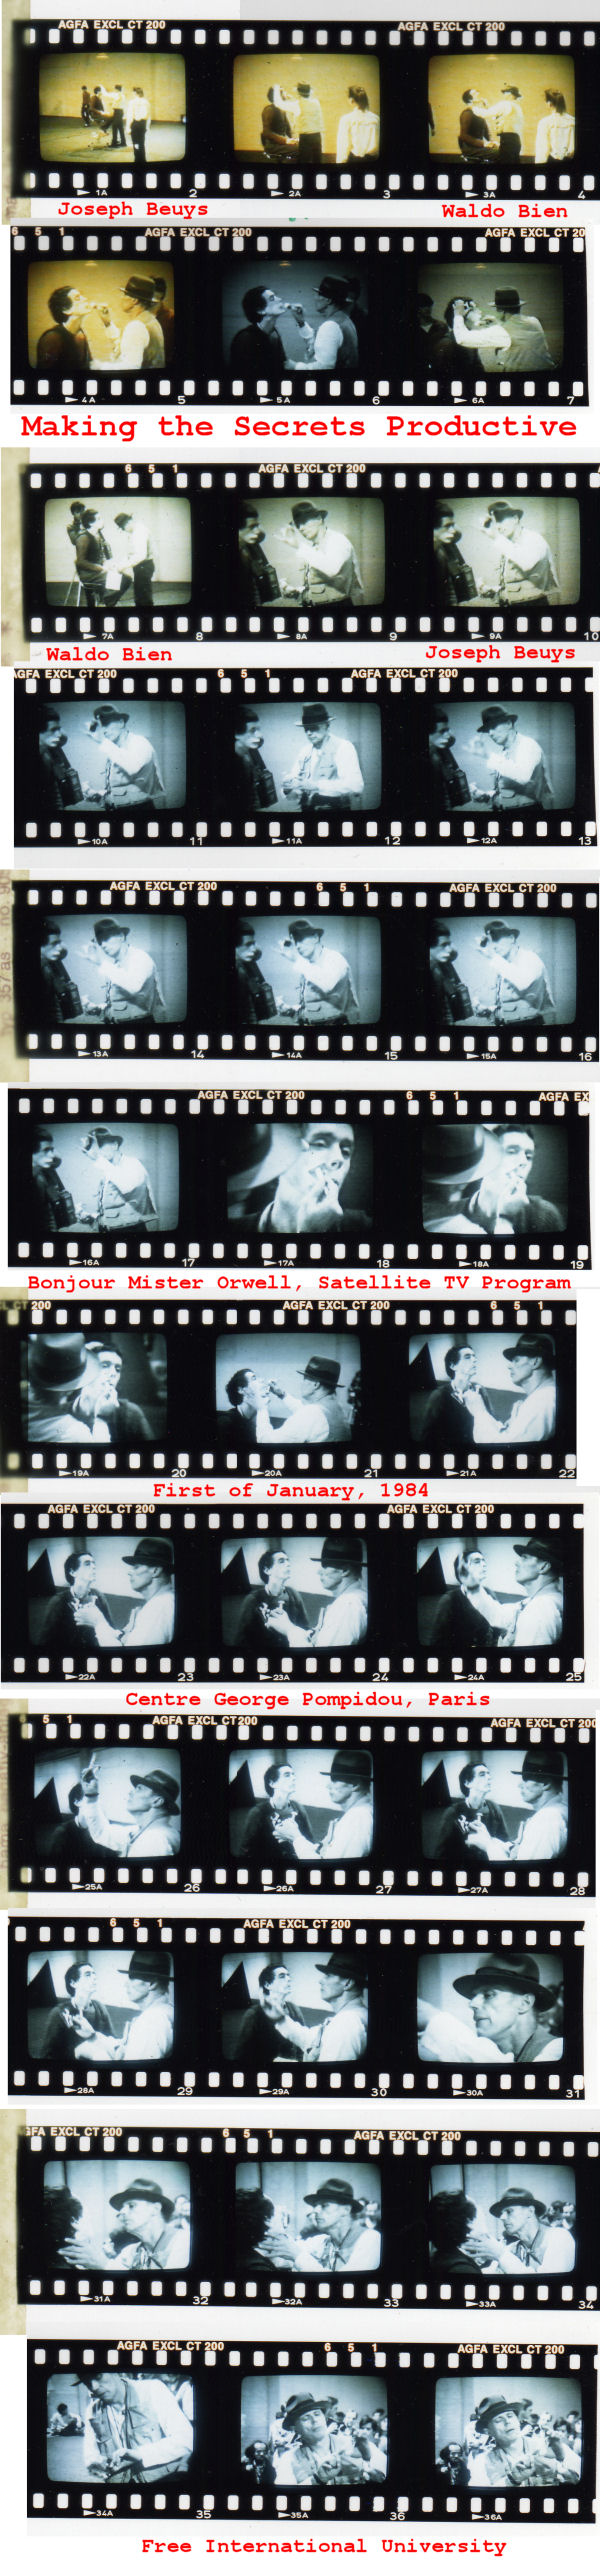 Contact Sheet, Goodmorning mr Orwell